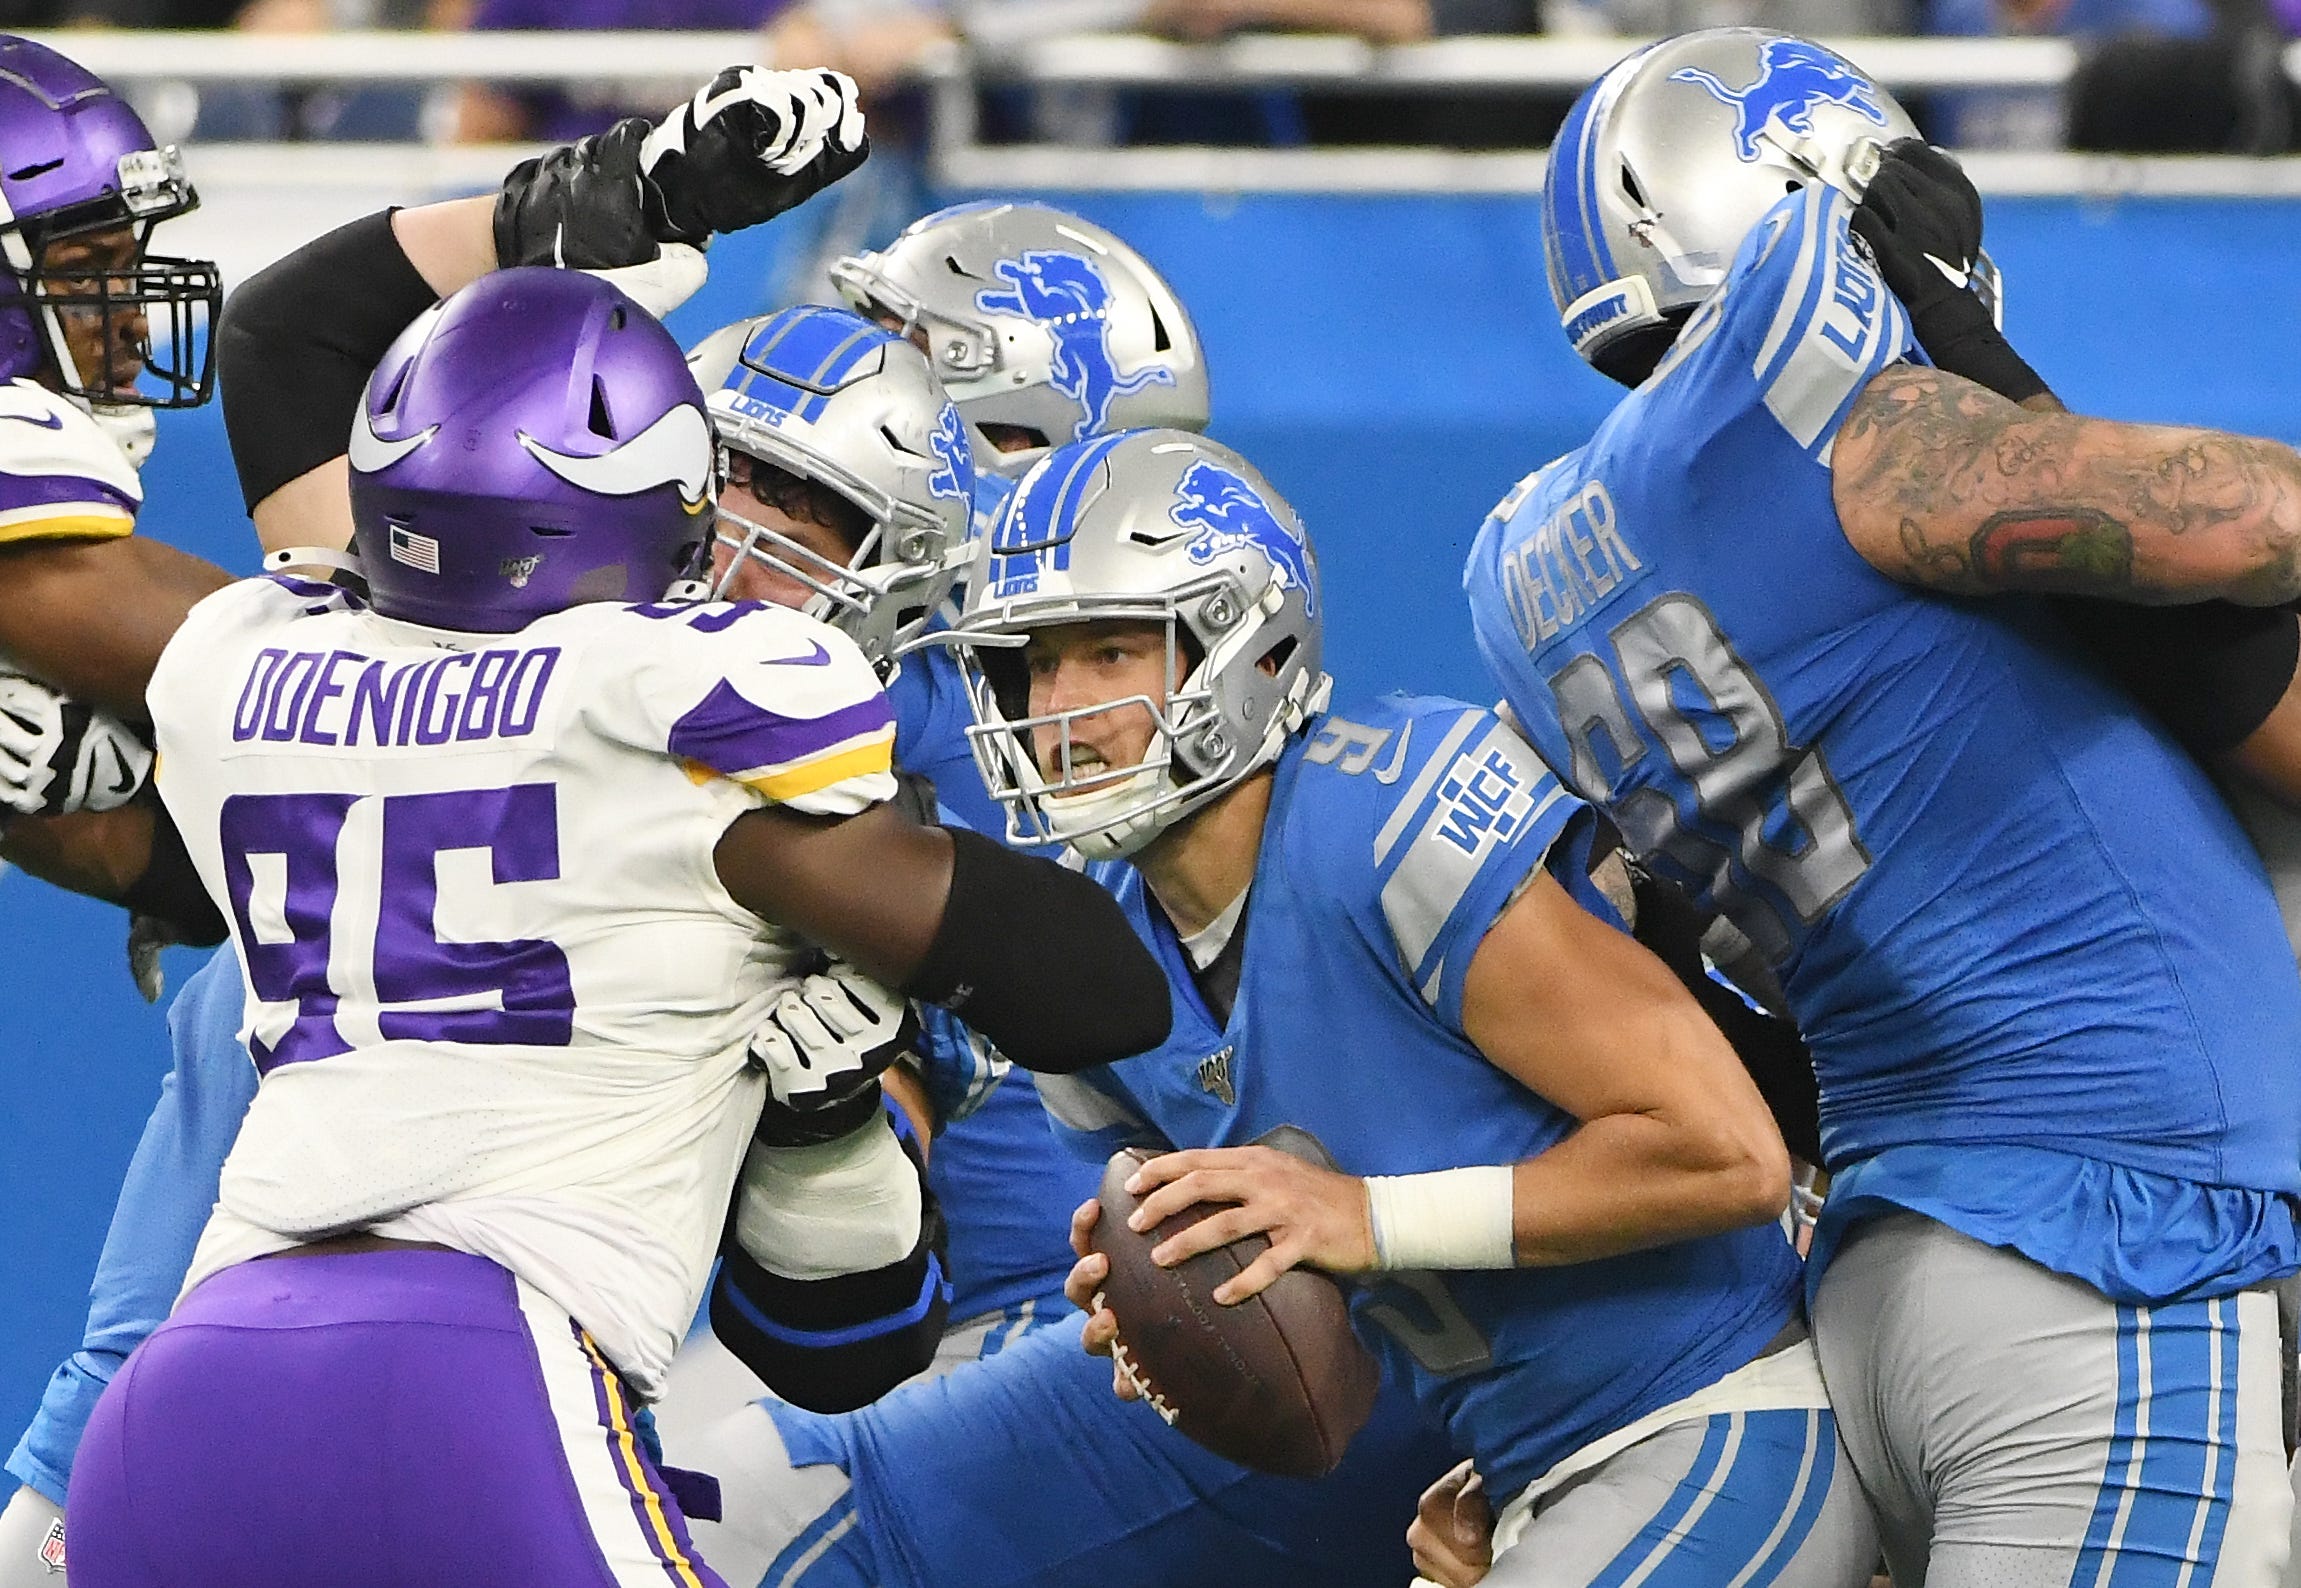 Lions quarterback Matthew Stafford sees the pocket collapsing around him and looks for an exit in the third quarter.